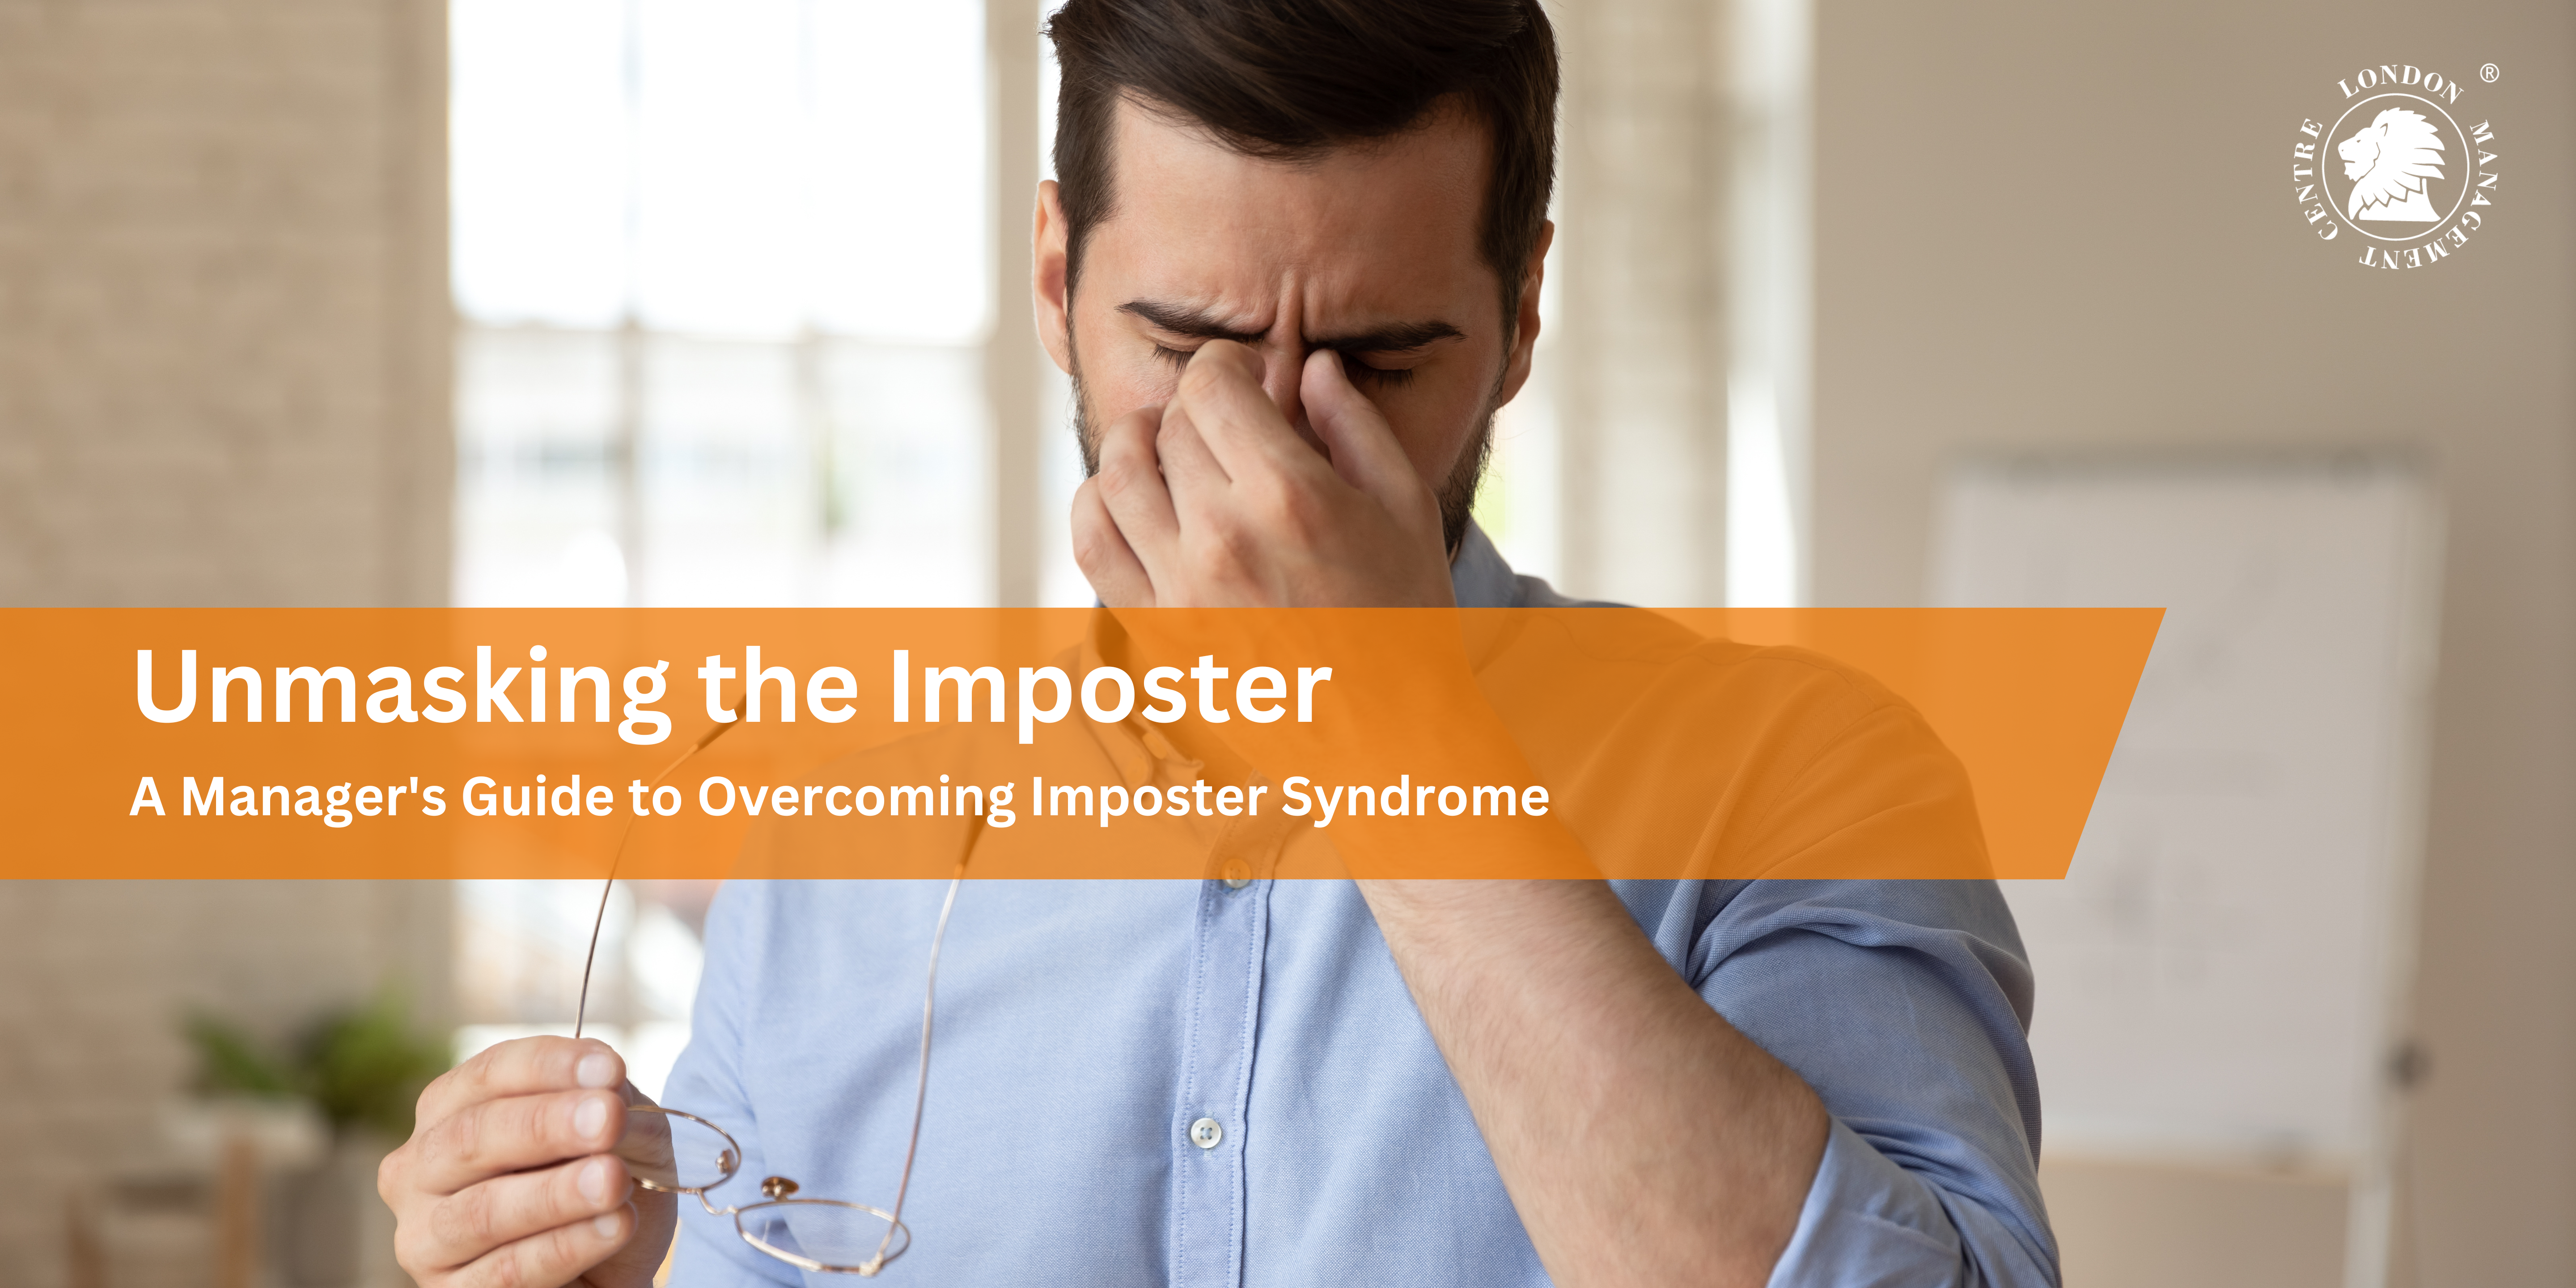 Unmasking the Imposter: A Manager's Guide to Overcoming Imposter Syndrome